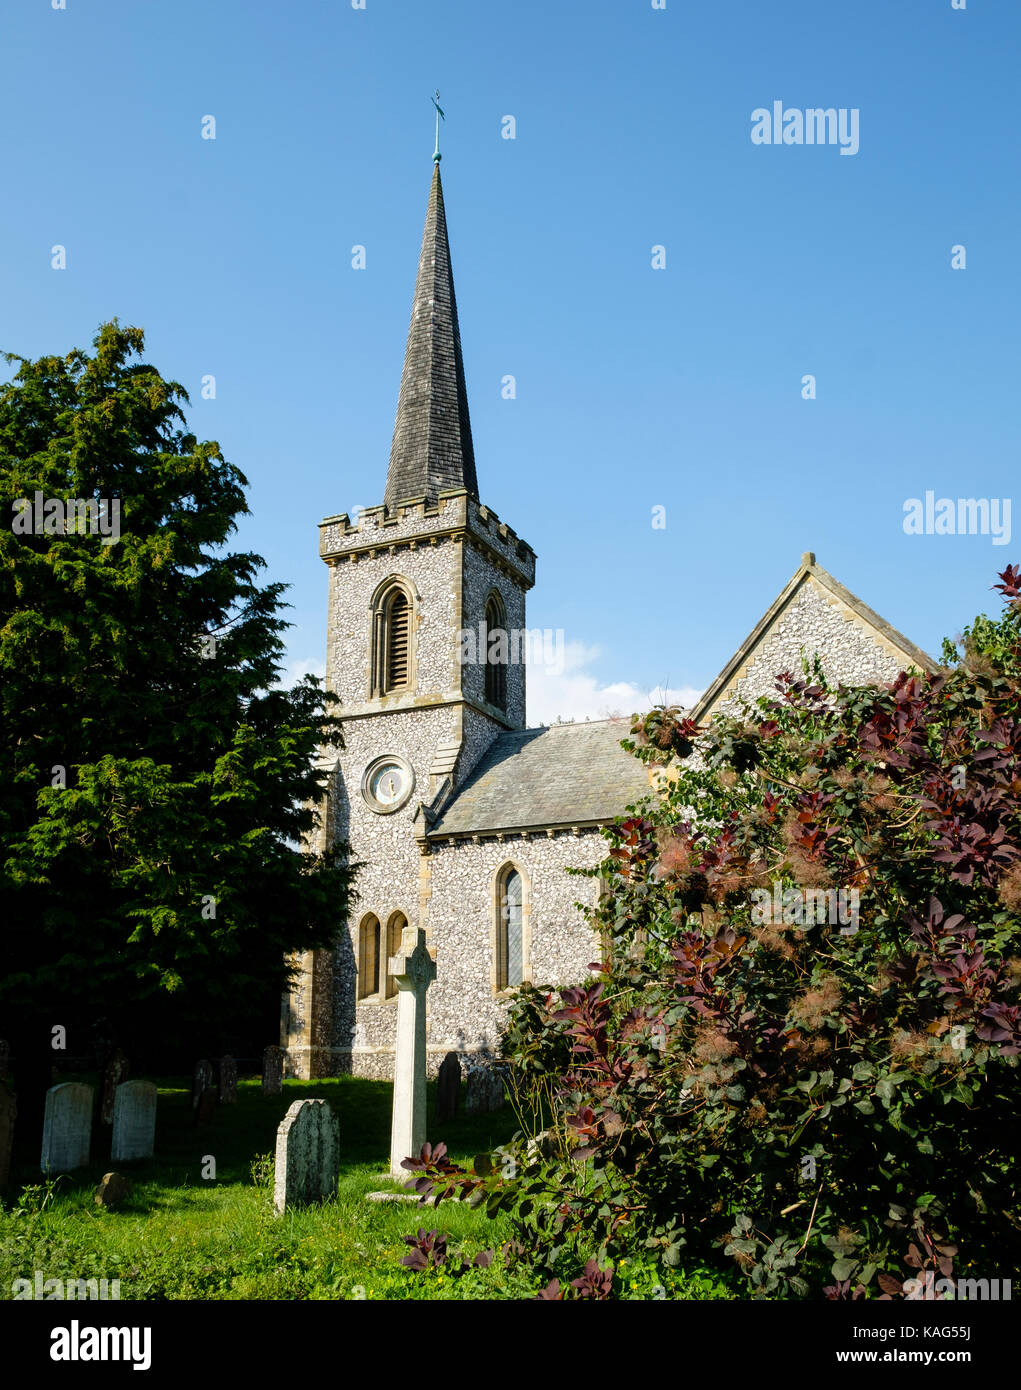 Stanmer Park, église Stanmer, Brighton, East Sussex. Banque D'Images